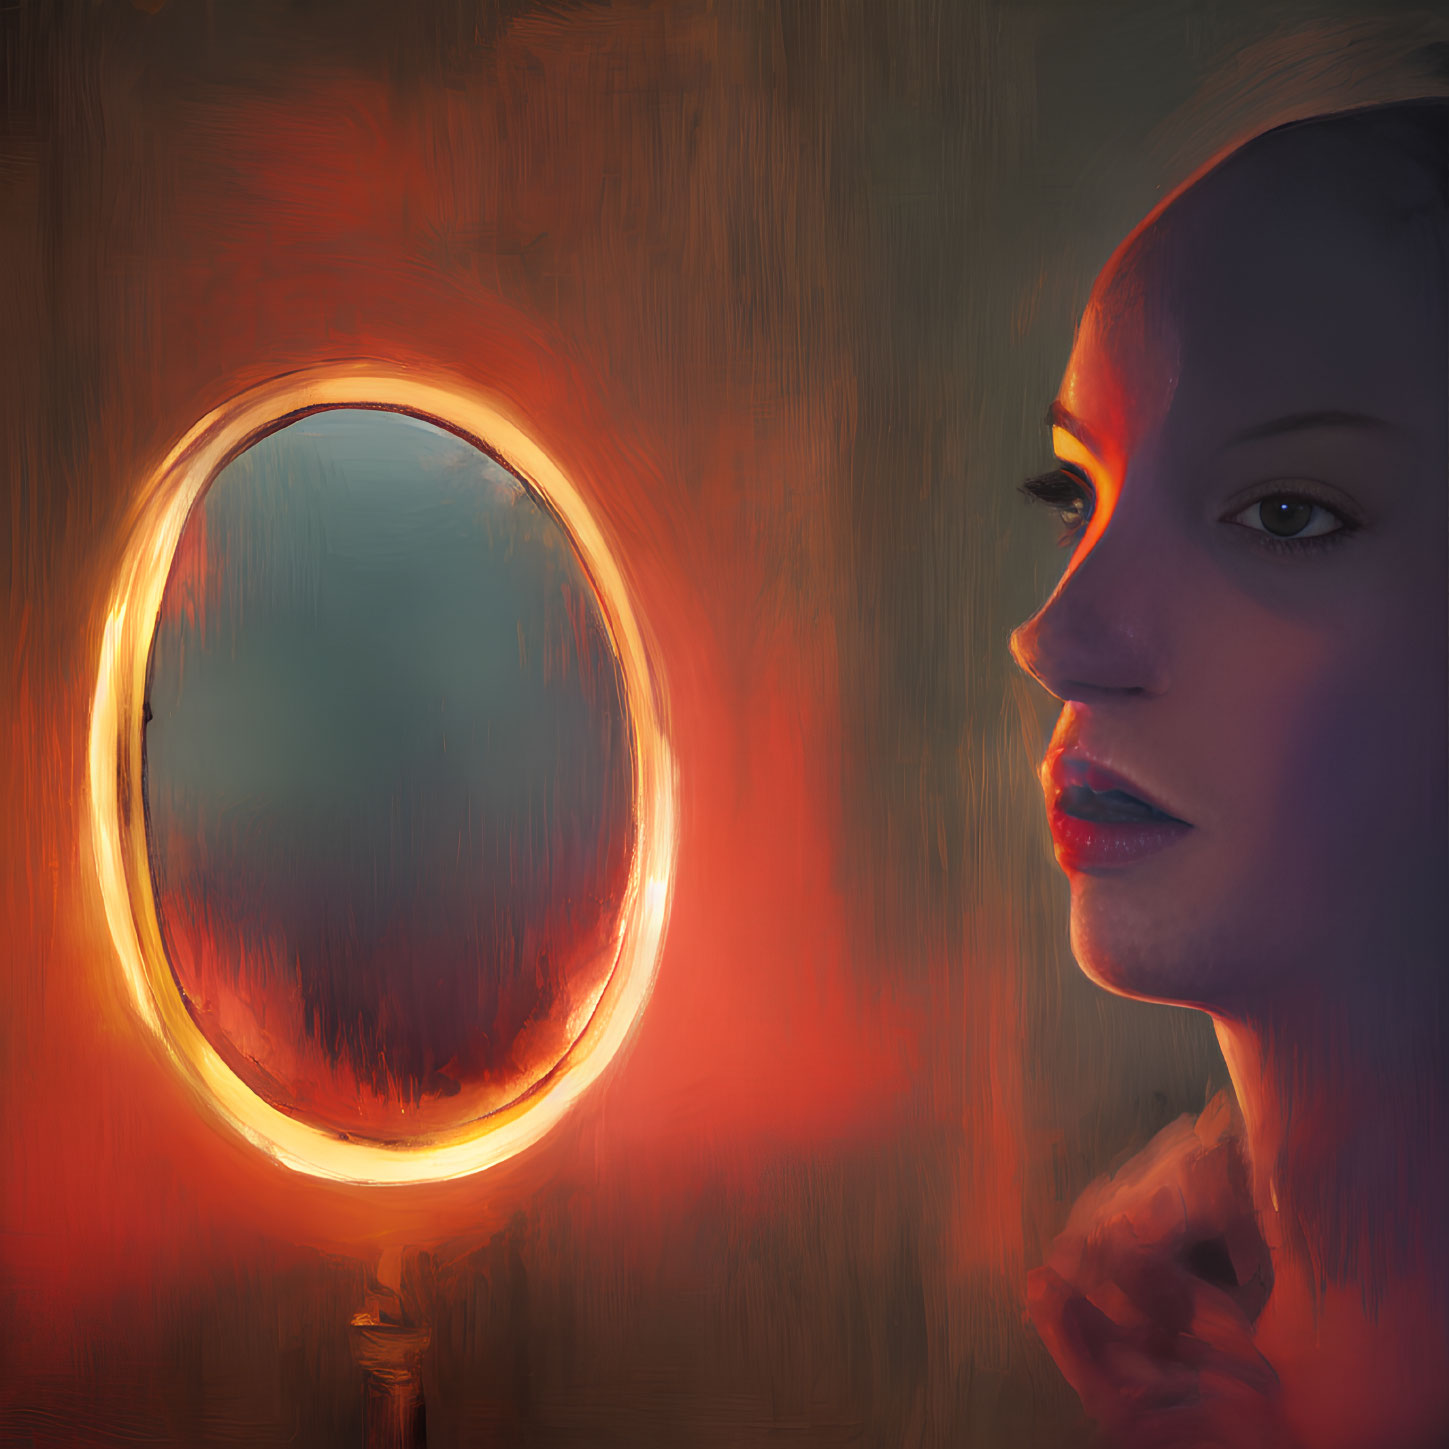 Side profile of a woman illuminated by warm orange light from a round mirror